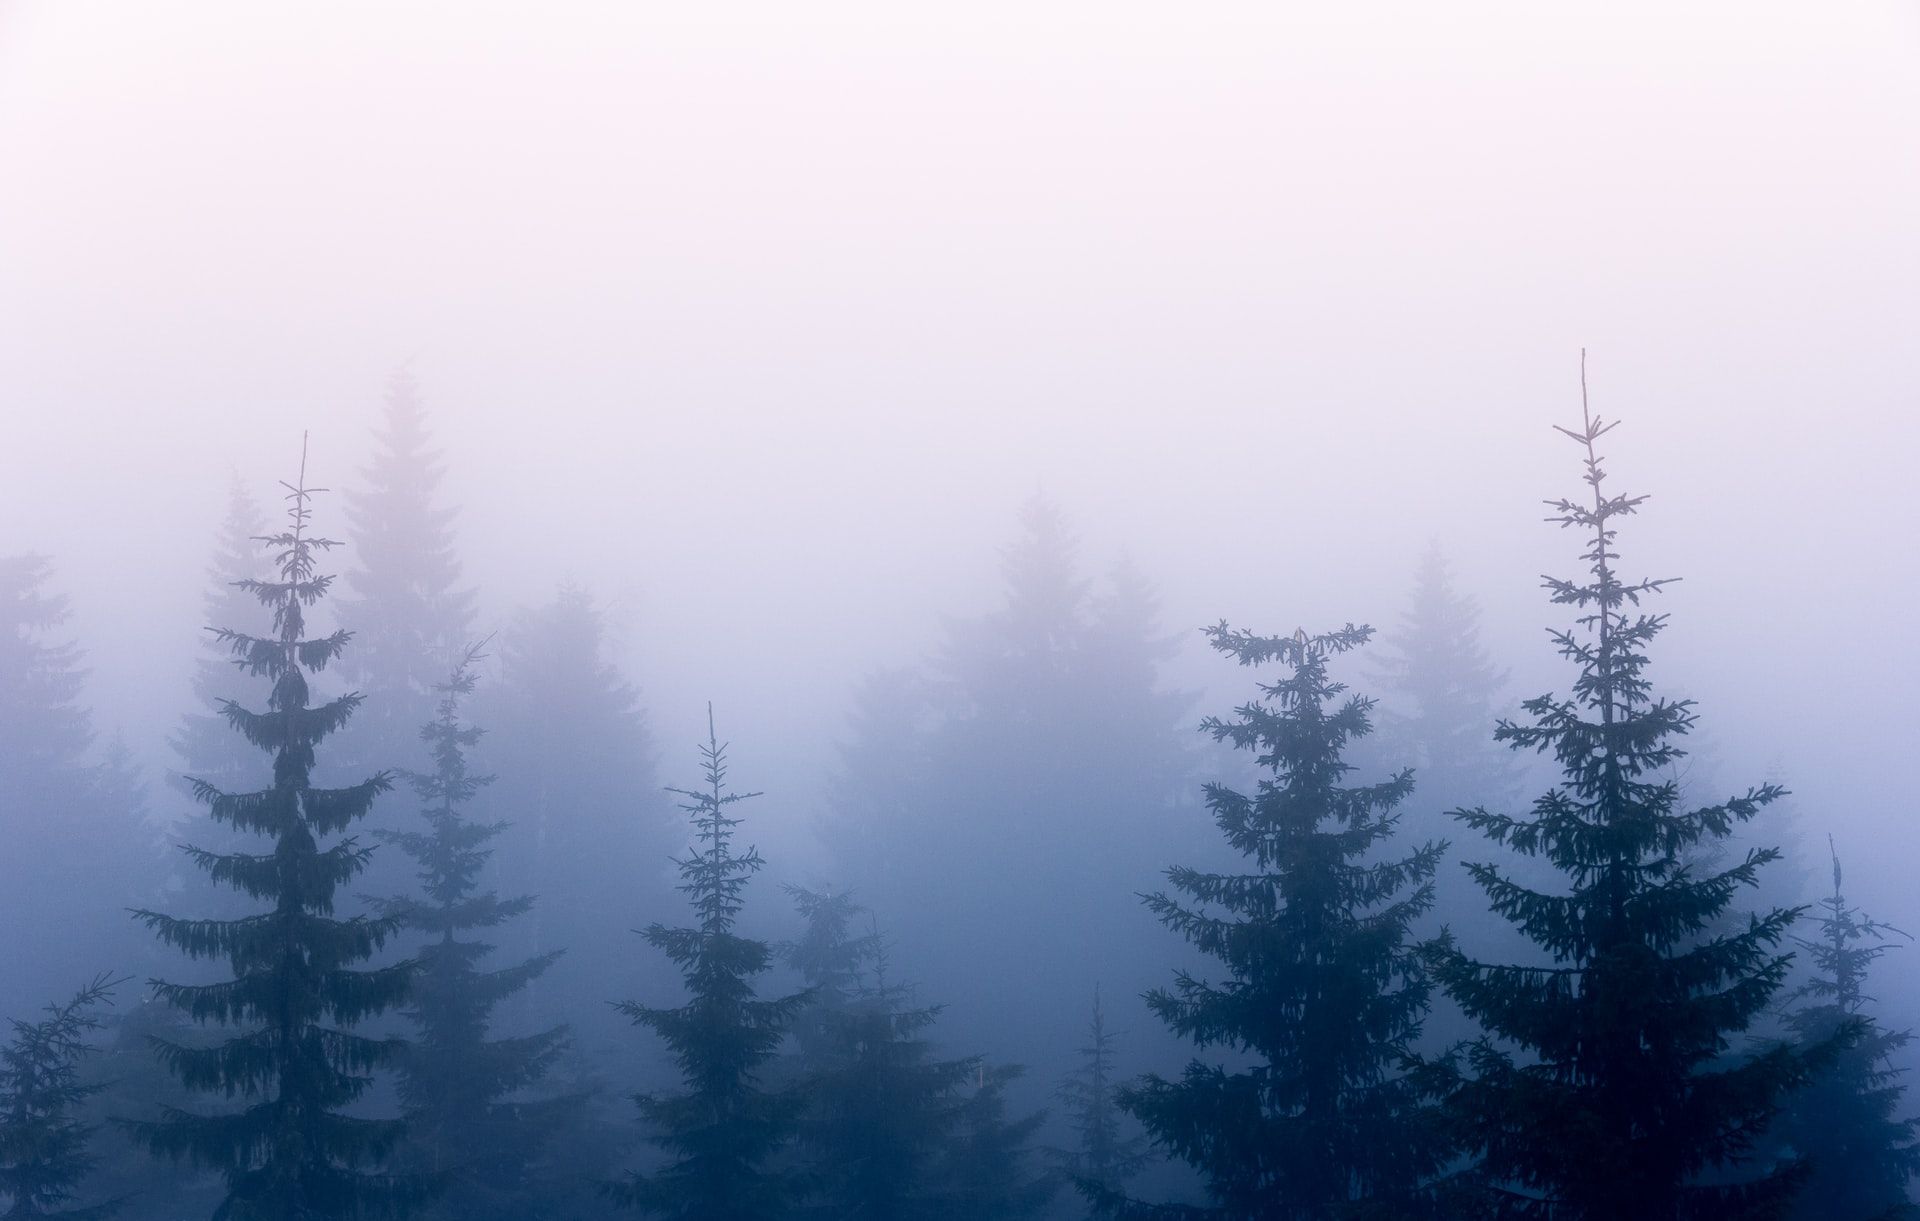 silhouettes of evergreen trees against a misty background